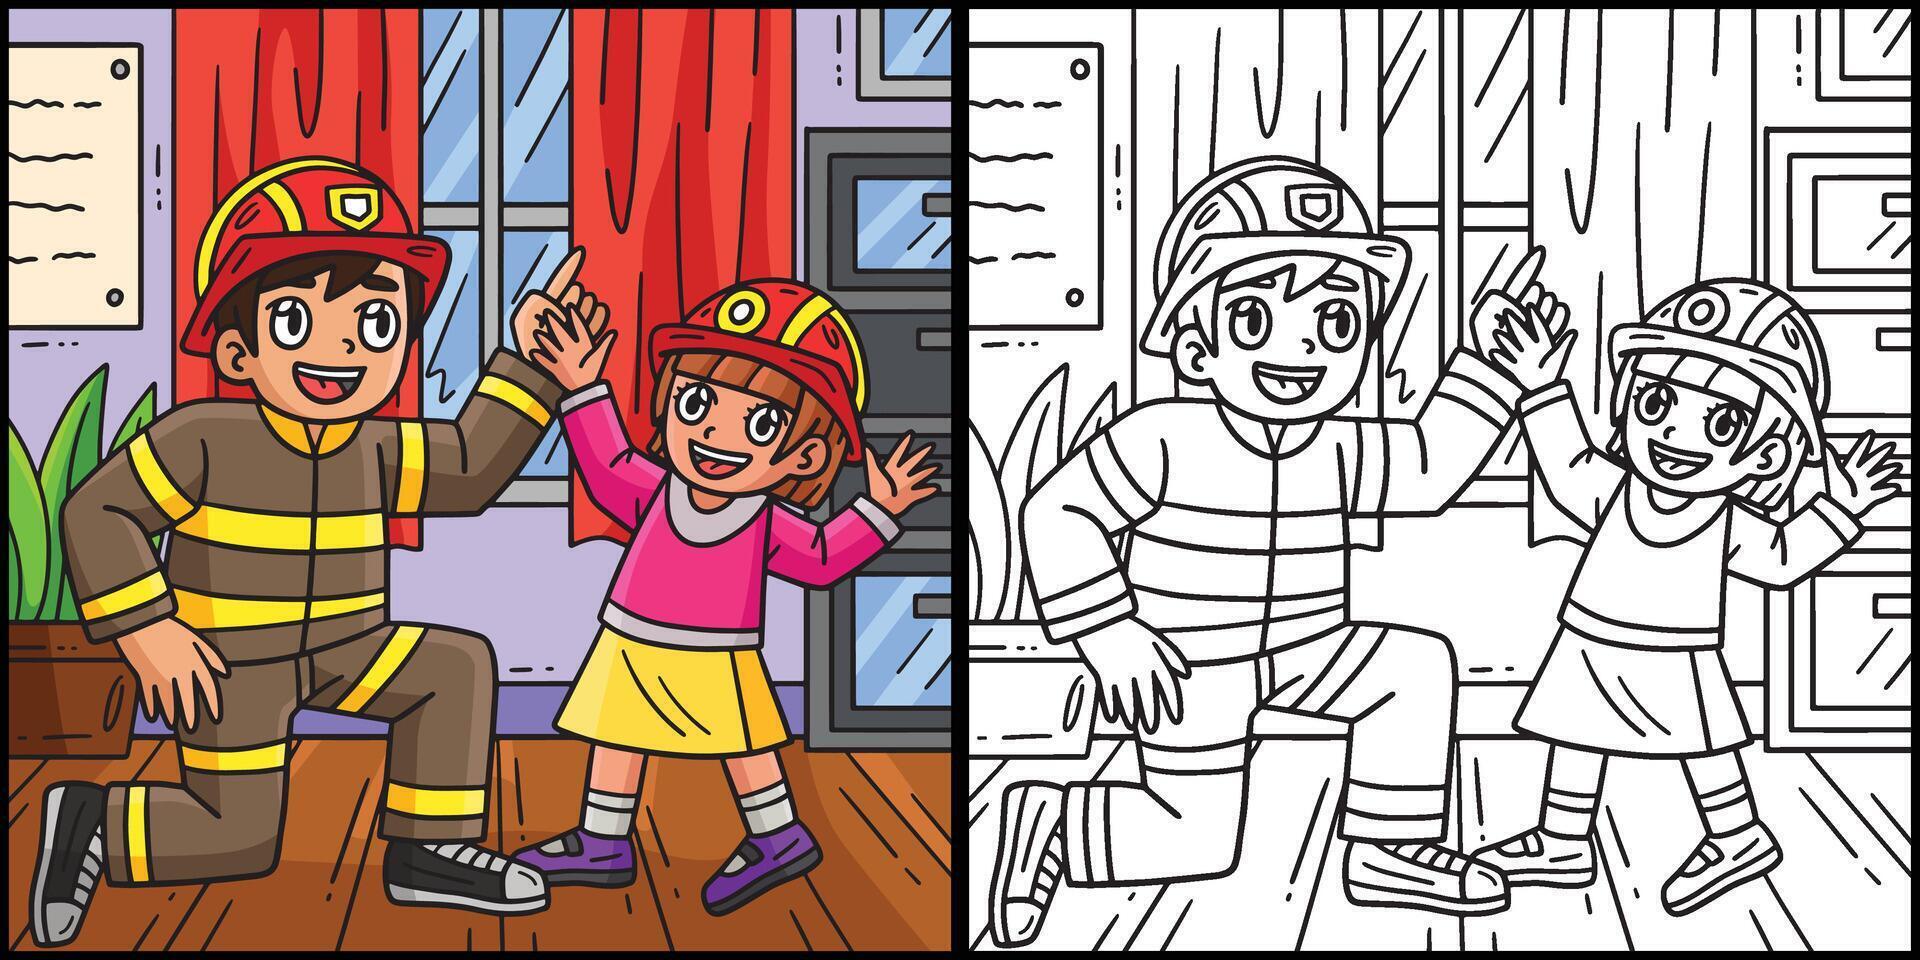 Firefighter and Child Coloring Page Illustration vector